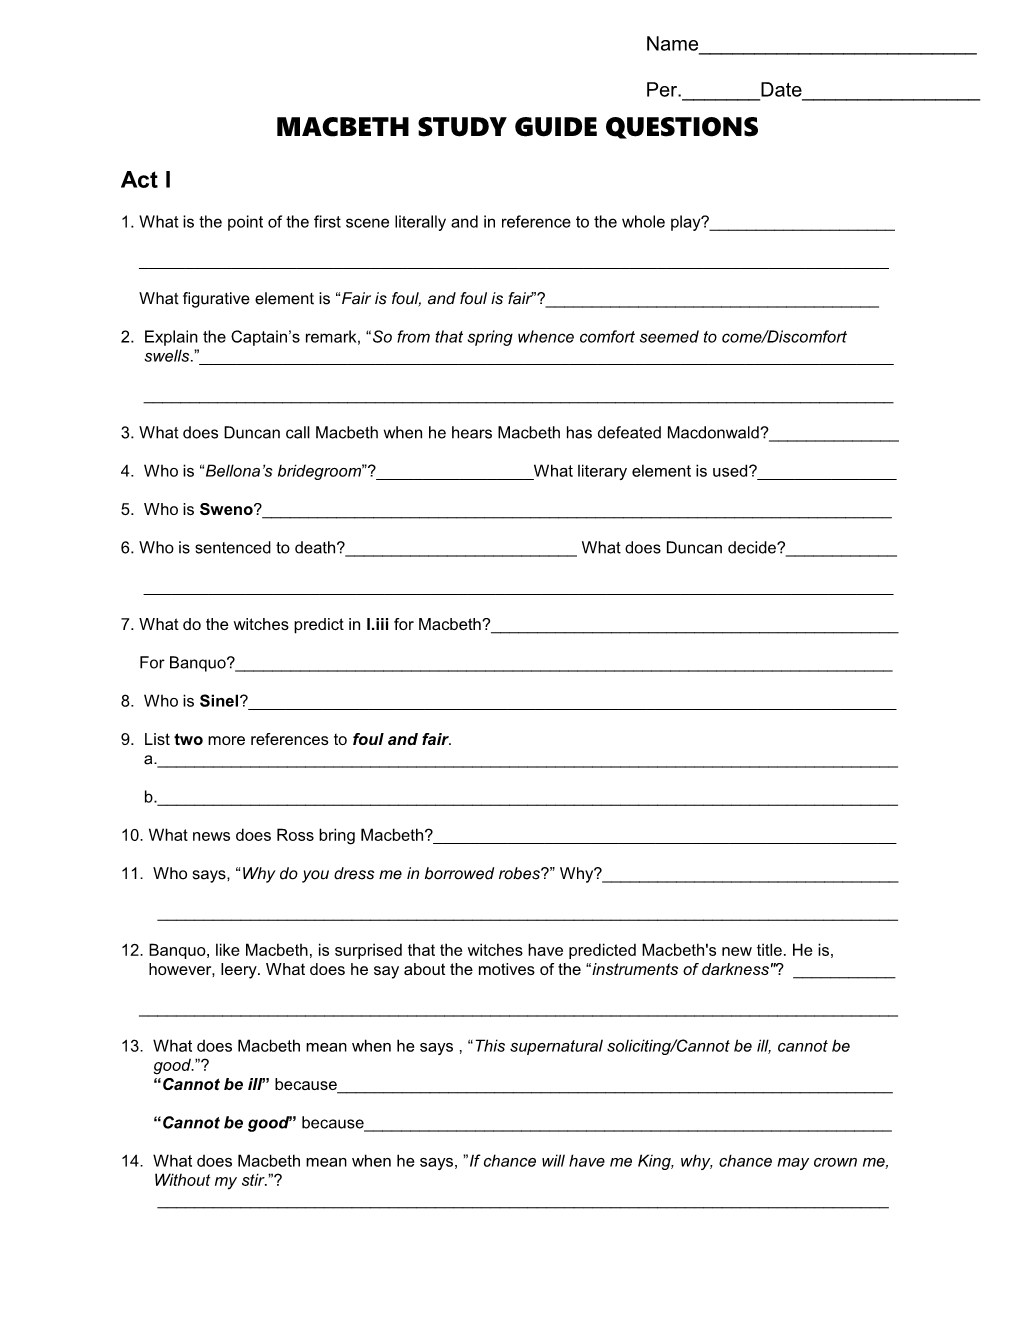 SHORT ANSWER STUDY GUIDE QUESTIONS - Macbeth